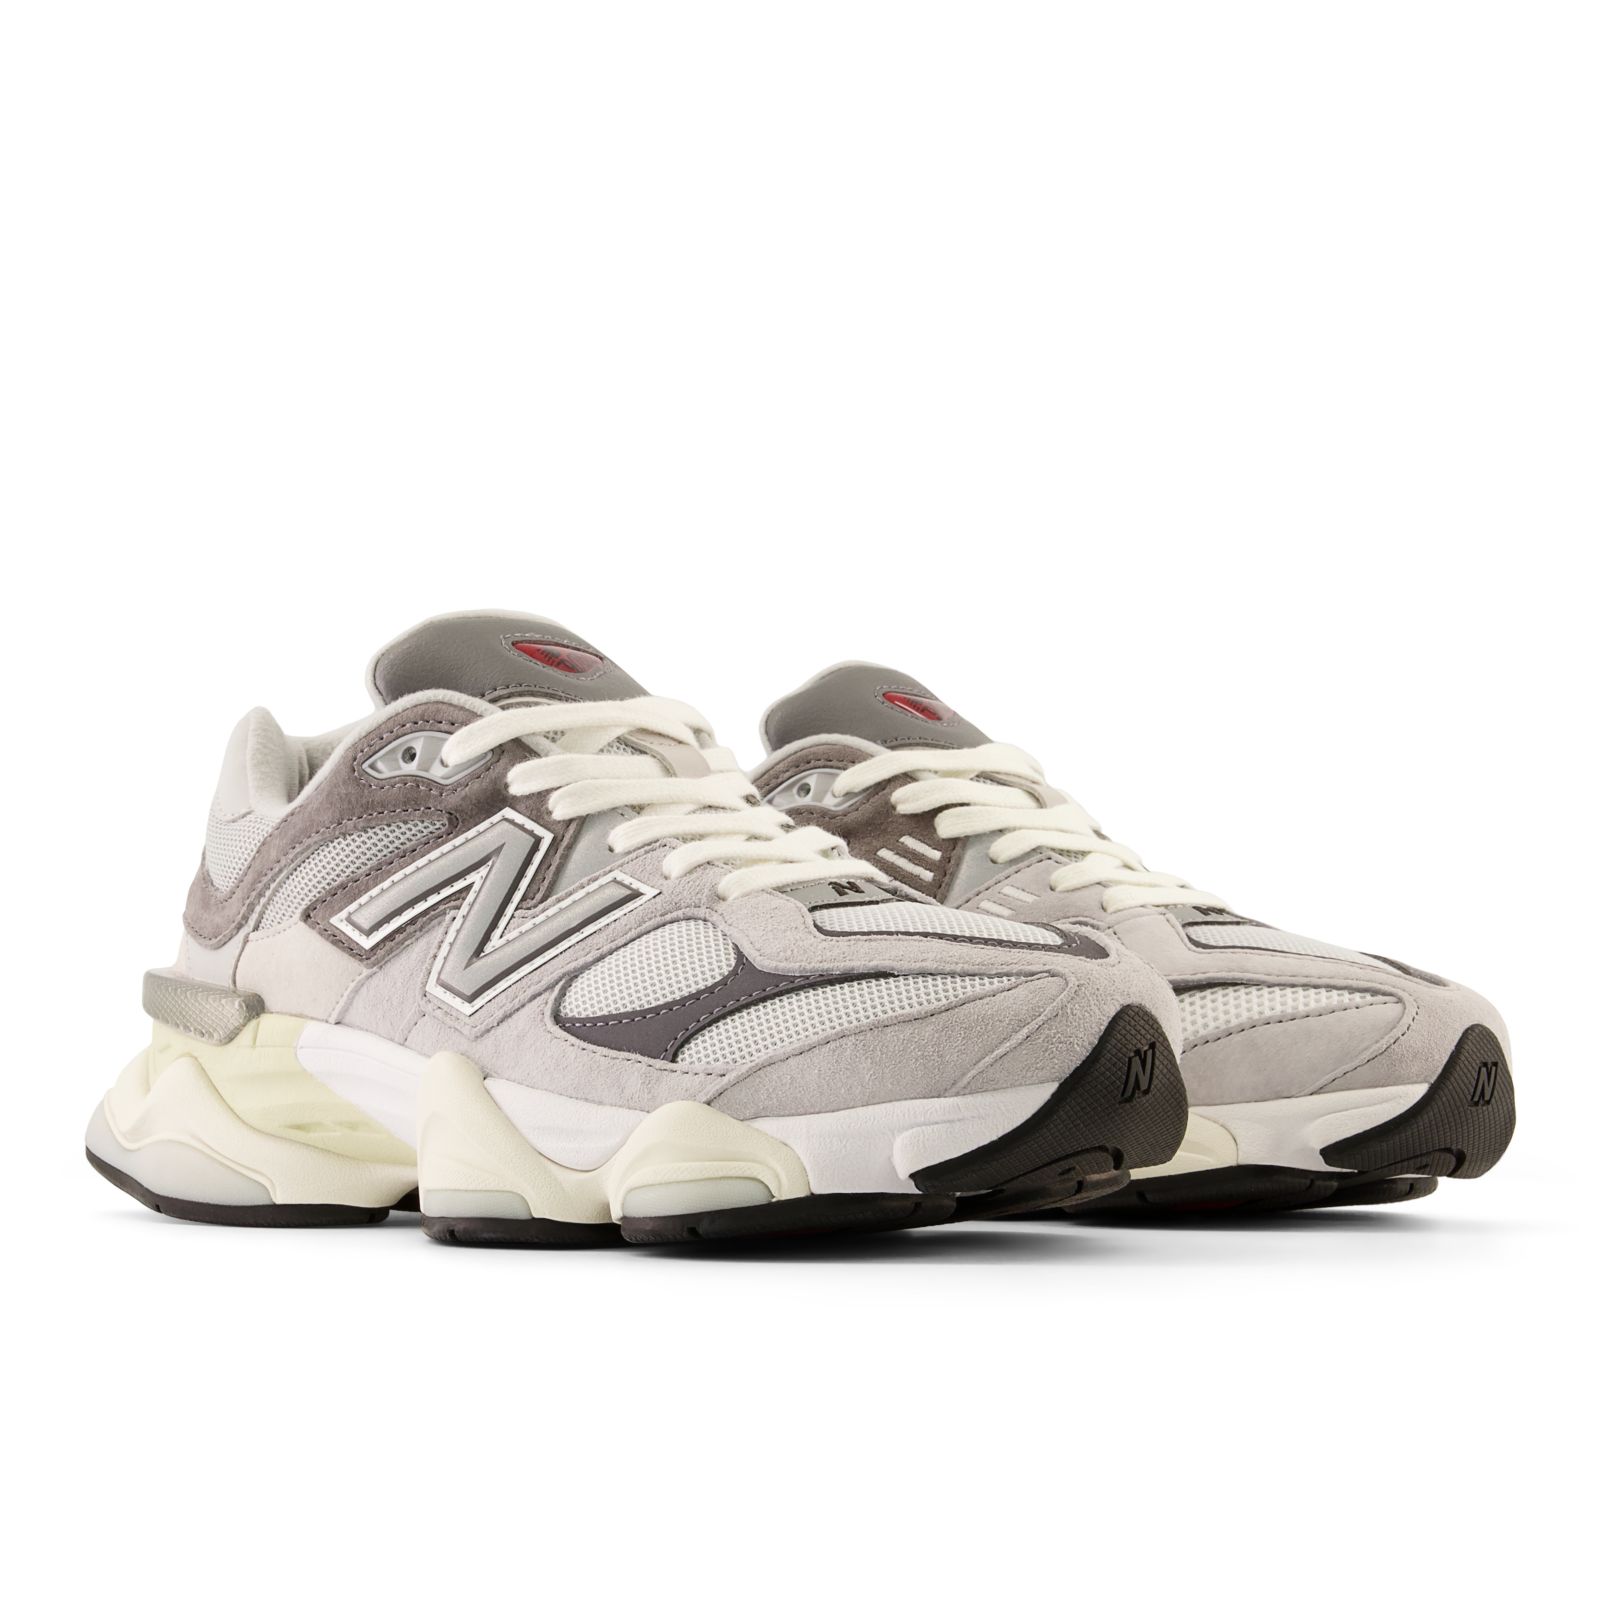 Men's New Balance 9060 Casual Shoes